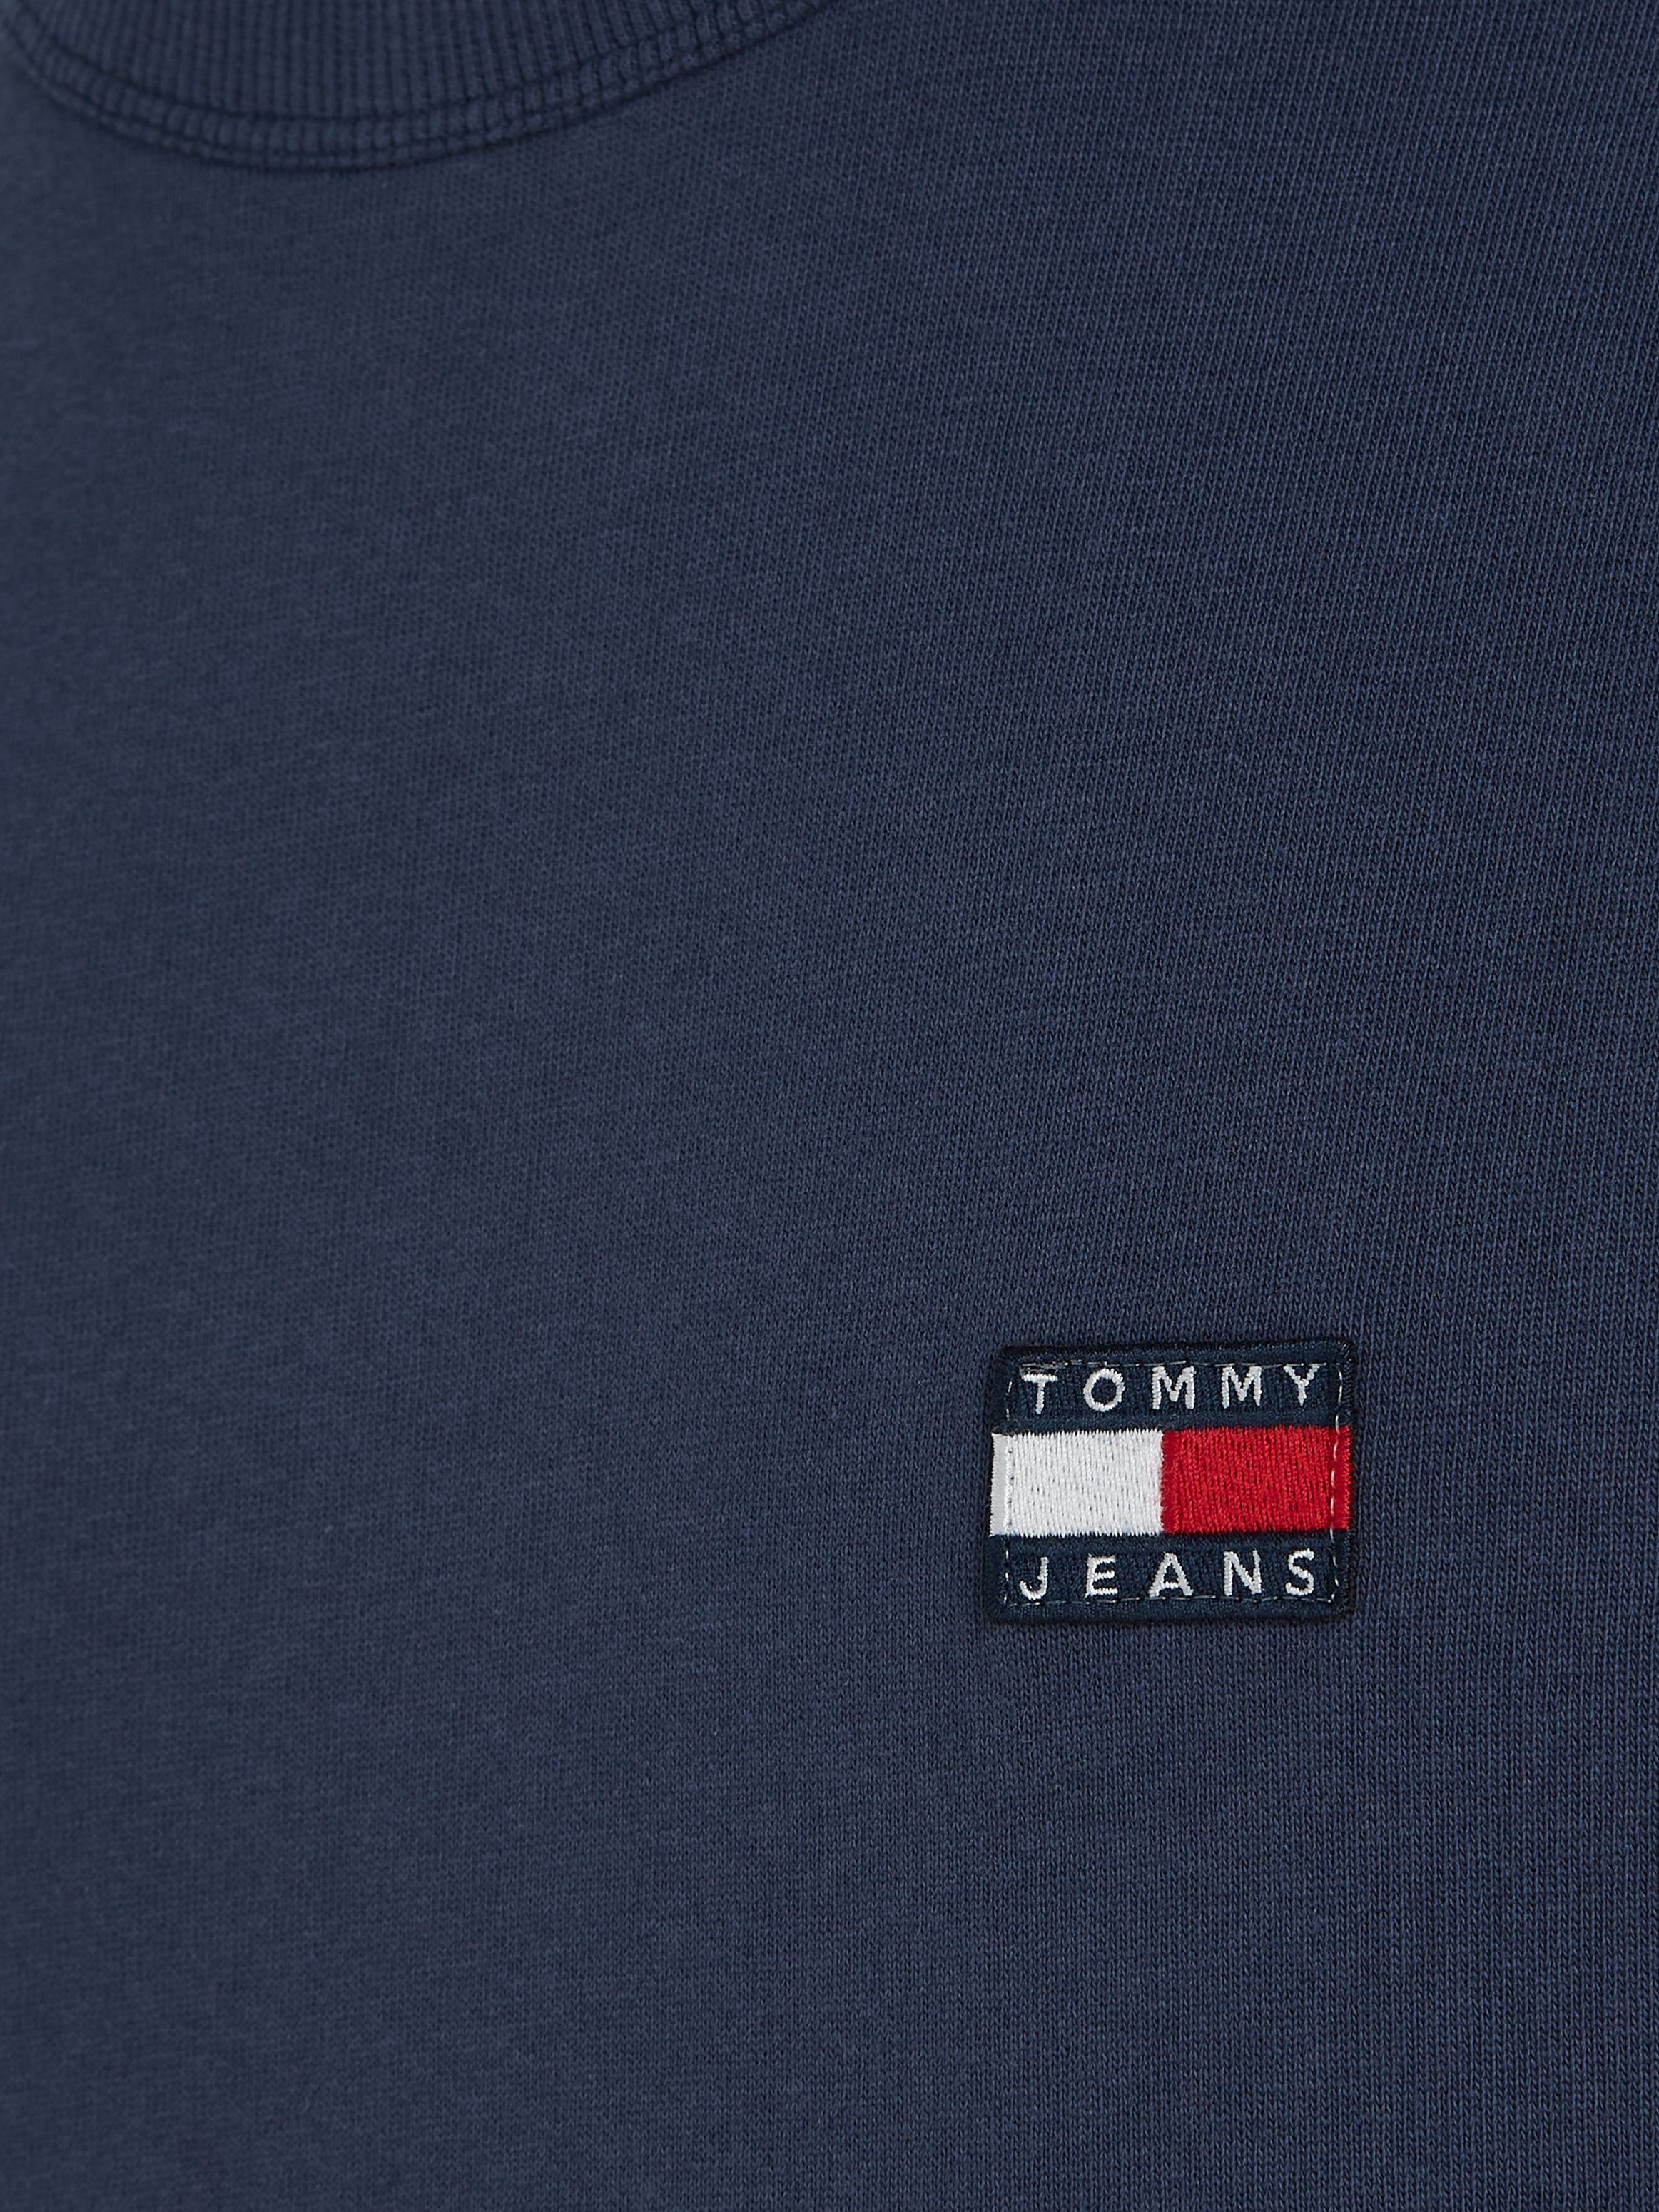 CLSC Twilight Tommy Navy T-Shirt TJM Jeans TEE XS BADGE TOMMY